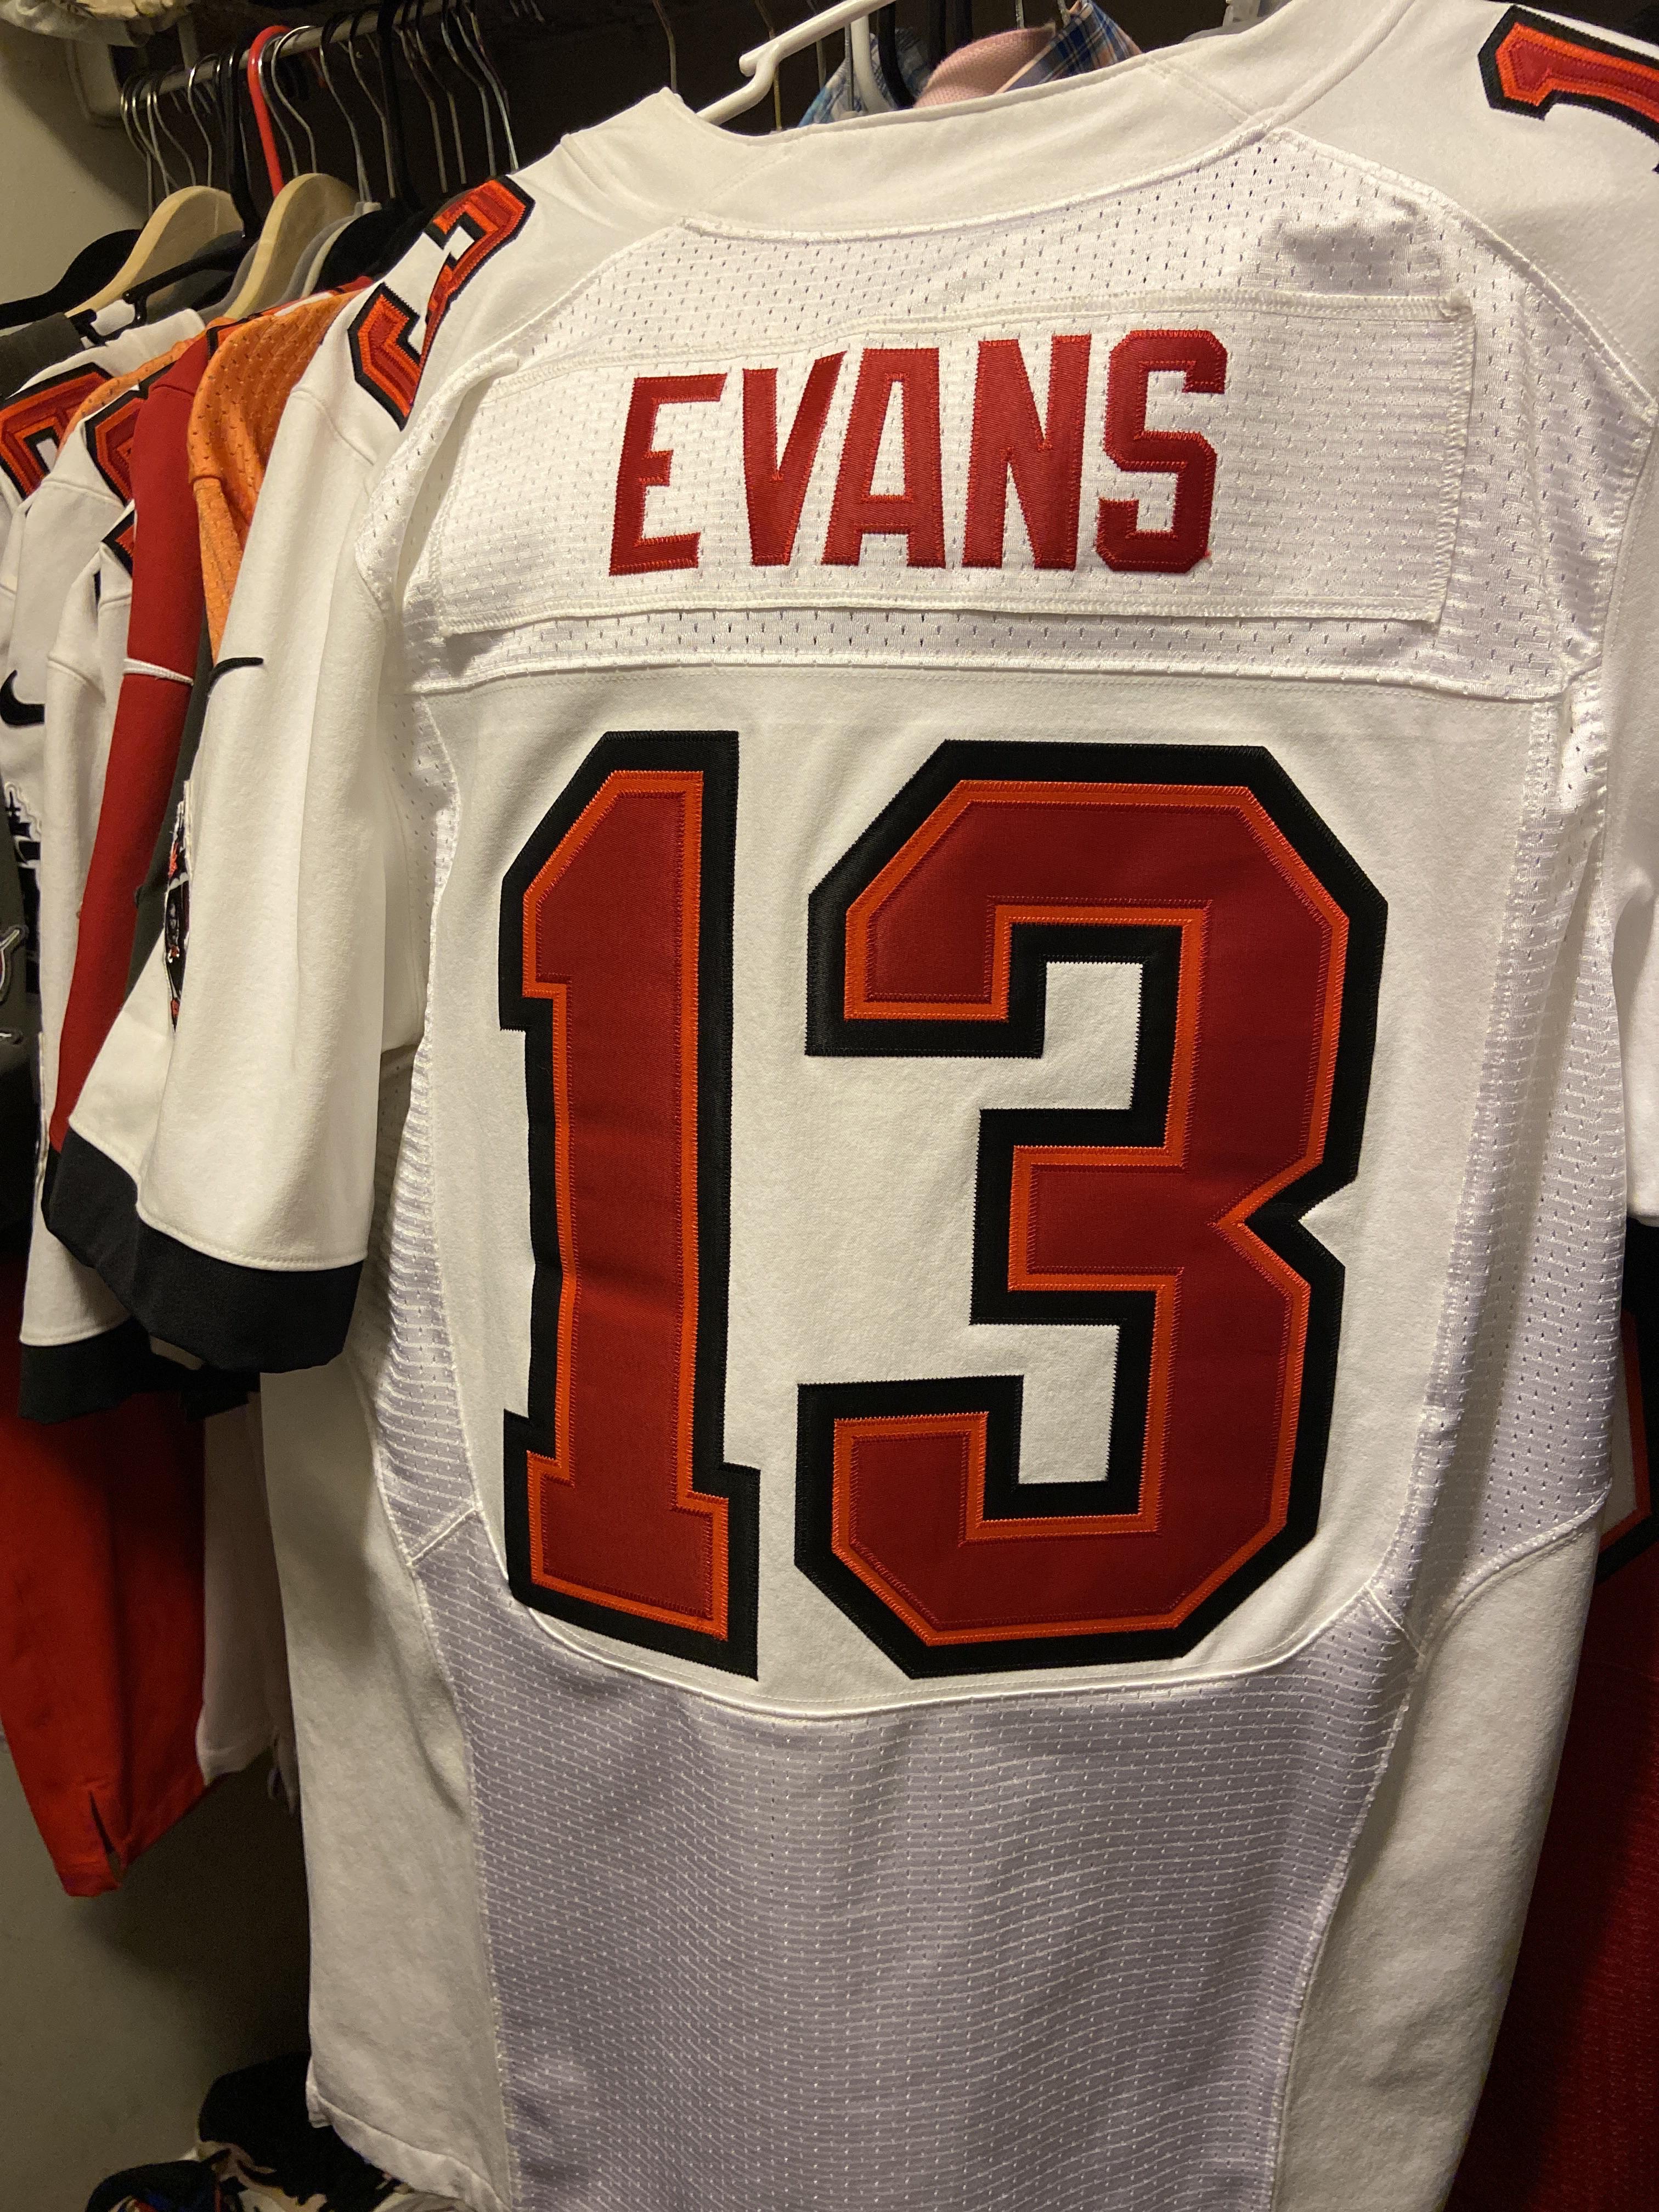 Greg Auman on X: Cool pic from Bucs sub on Reddit: Mike Evans came to  Tampa in 2014, just missed the old pewter-and-red uniforms, but one fan got  a custom Evans No.